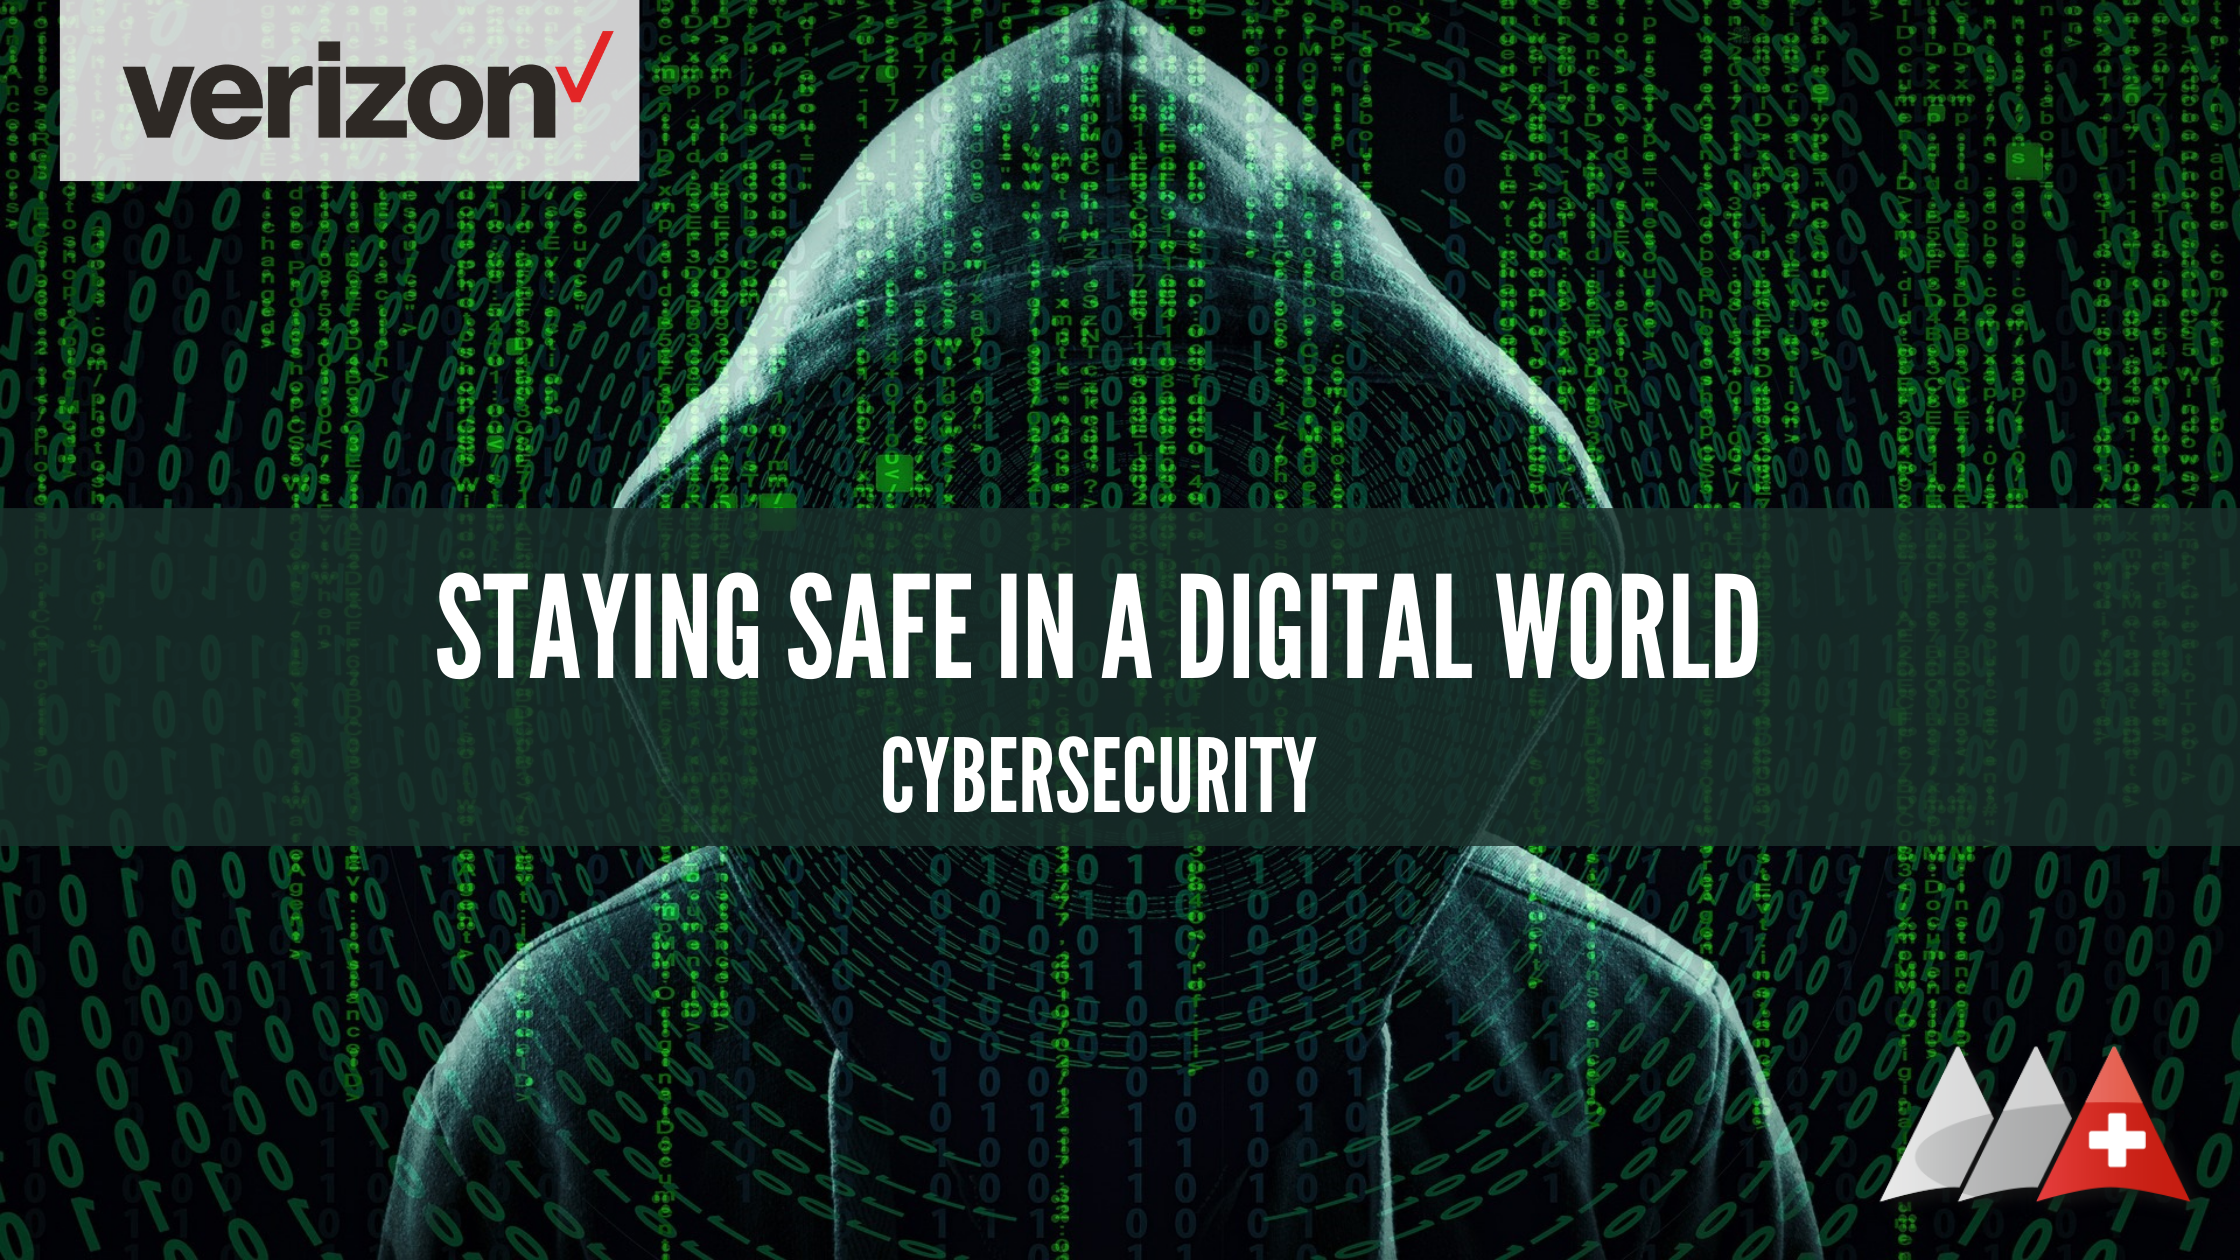 Cybersecurity Staying safe in digital world